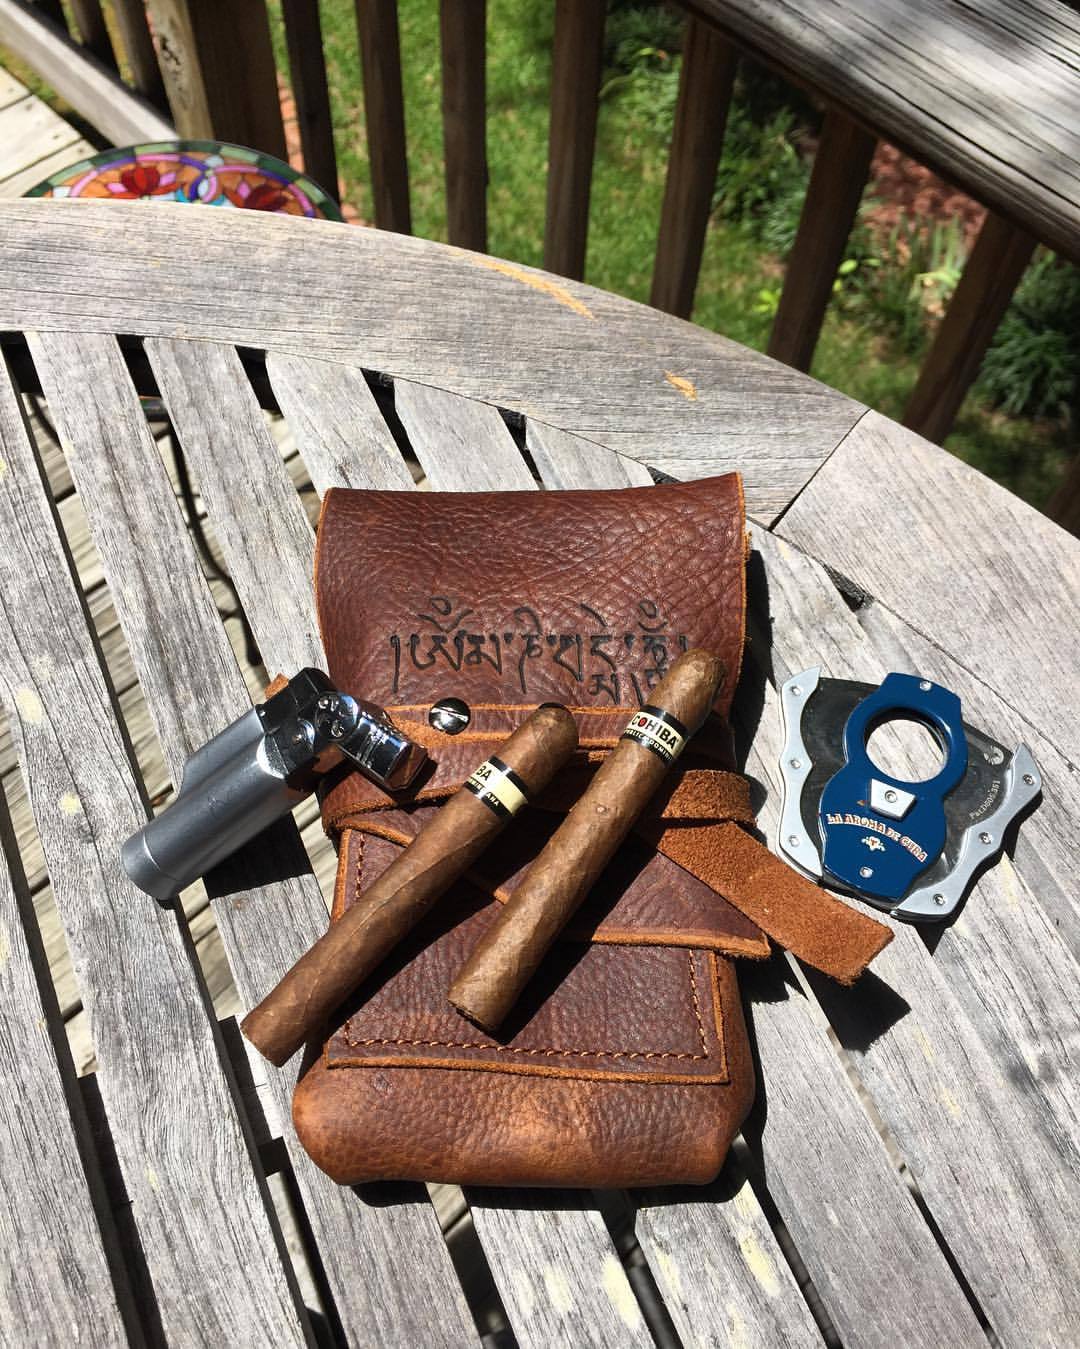 This customer had me burn Tibetan script into his Legendary Saxon leather cigar carrier. Pretty cool. I hadn’t done that script before. I can hand burn any language into your leather cut. #madeinusa #veteranmade #ruggedluxury #OriginalDesign #cigar...